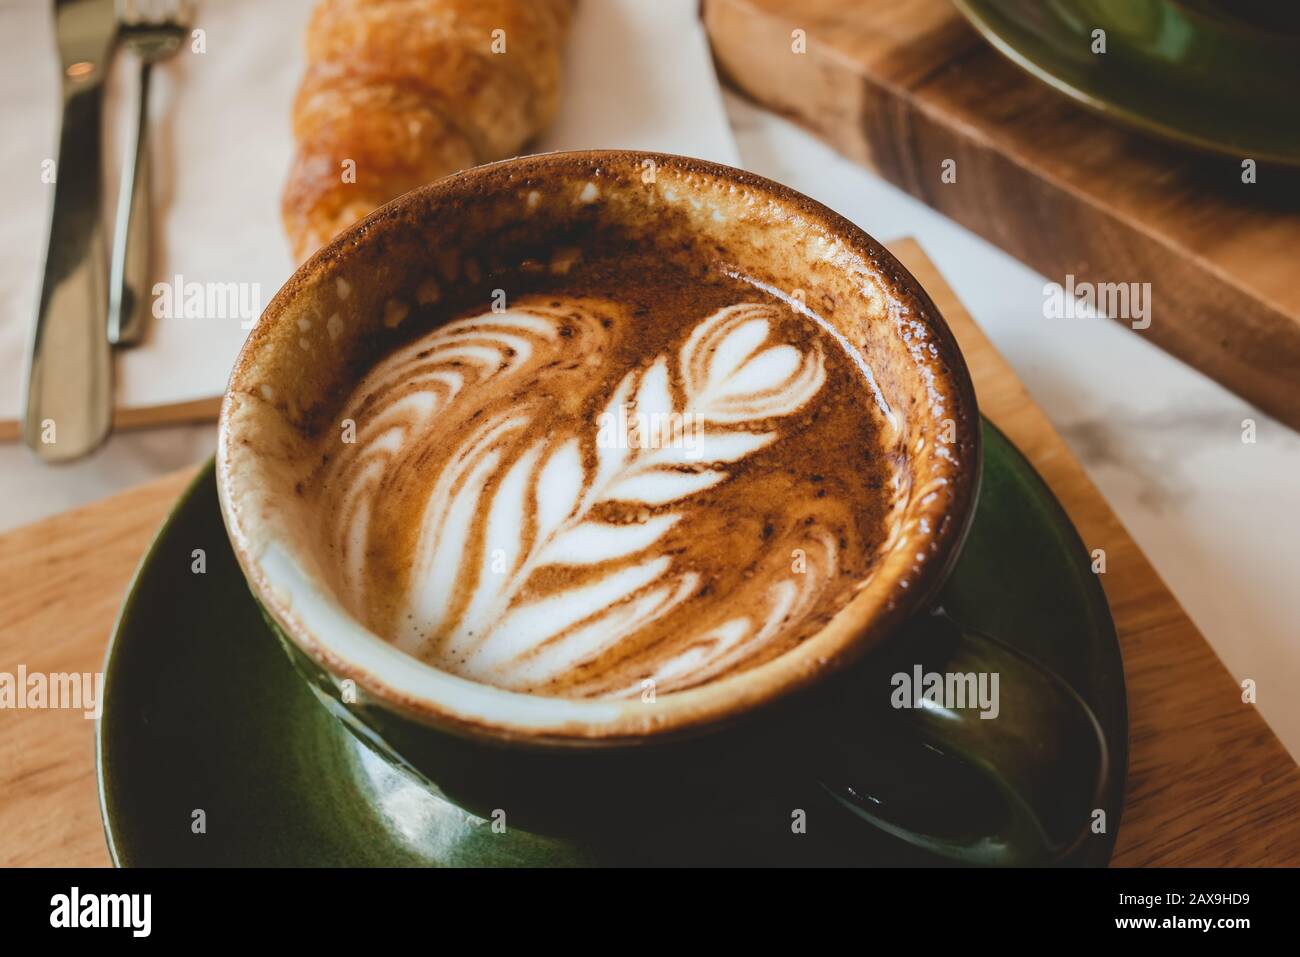 Hot coffee cappuccino latte art serve with croissant in morning worm lighting. Stock Photo